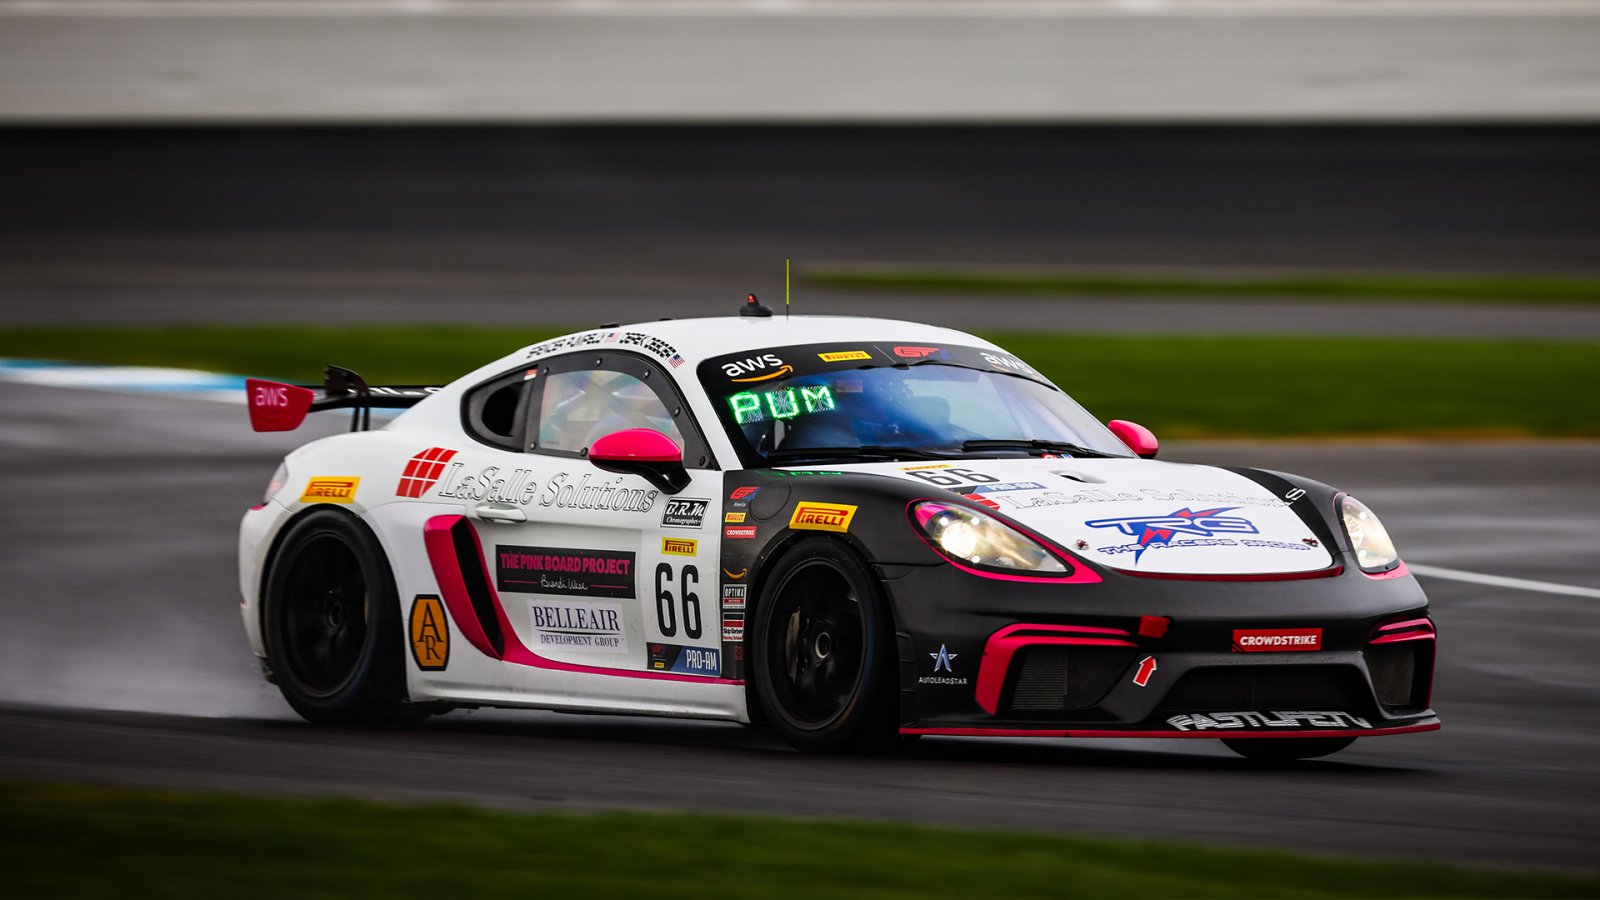 Porsche, BMWs Close Out Final Practice Session of the Season